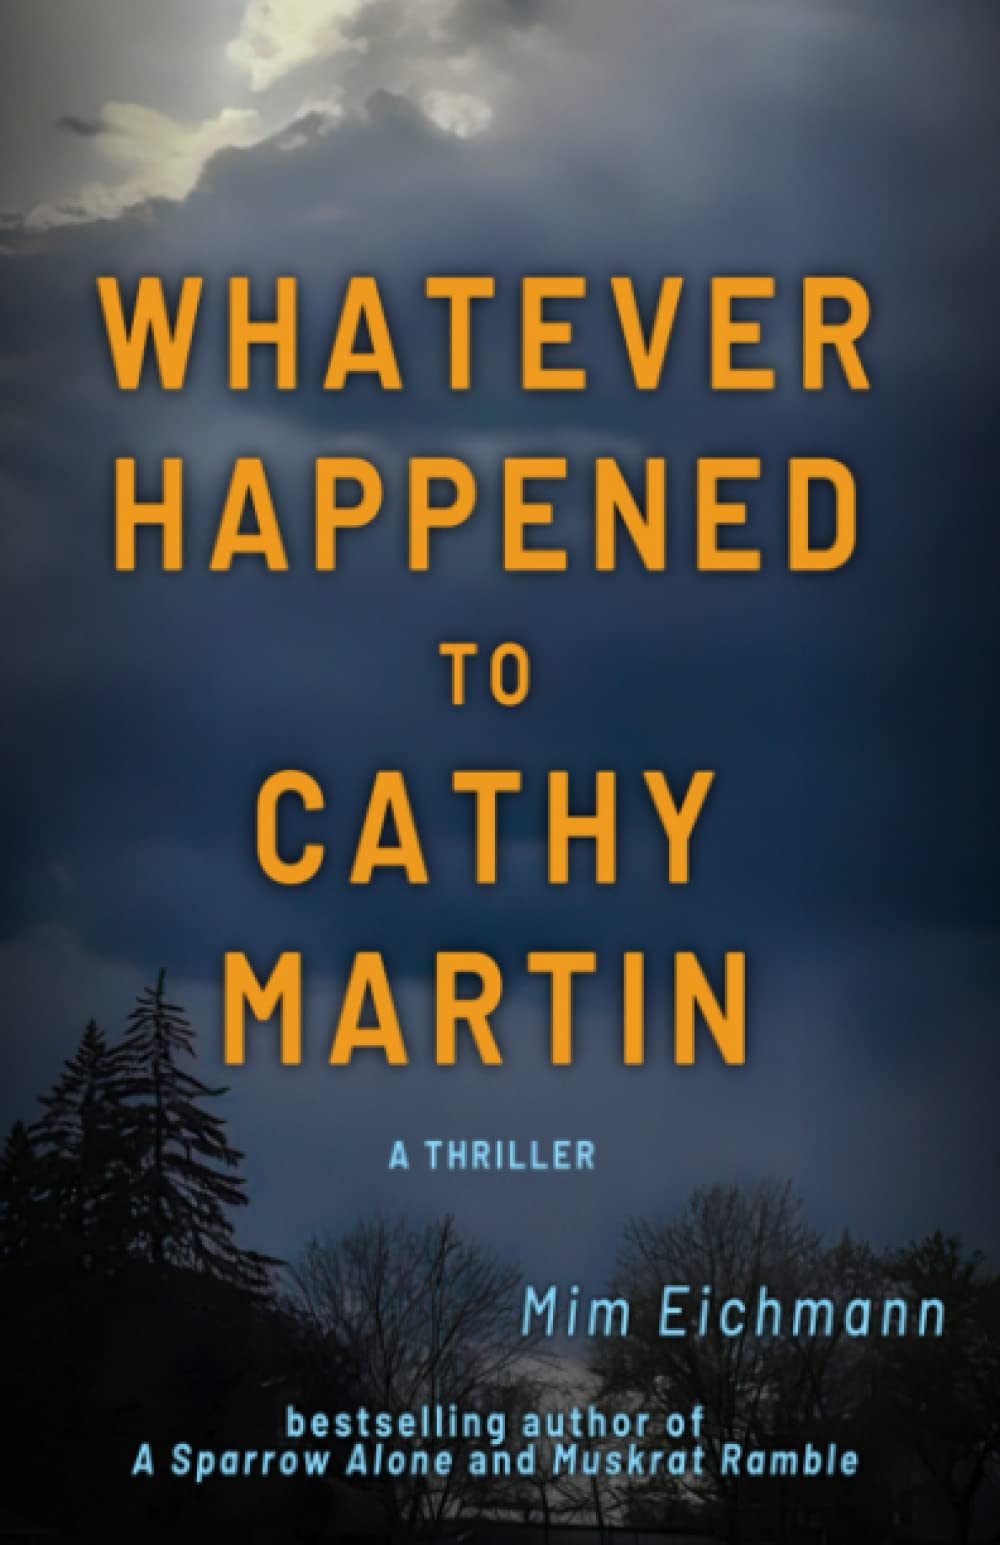 In-Person Event: Mim Eichmann/Whatever Happened to Cathy Martin